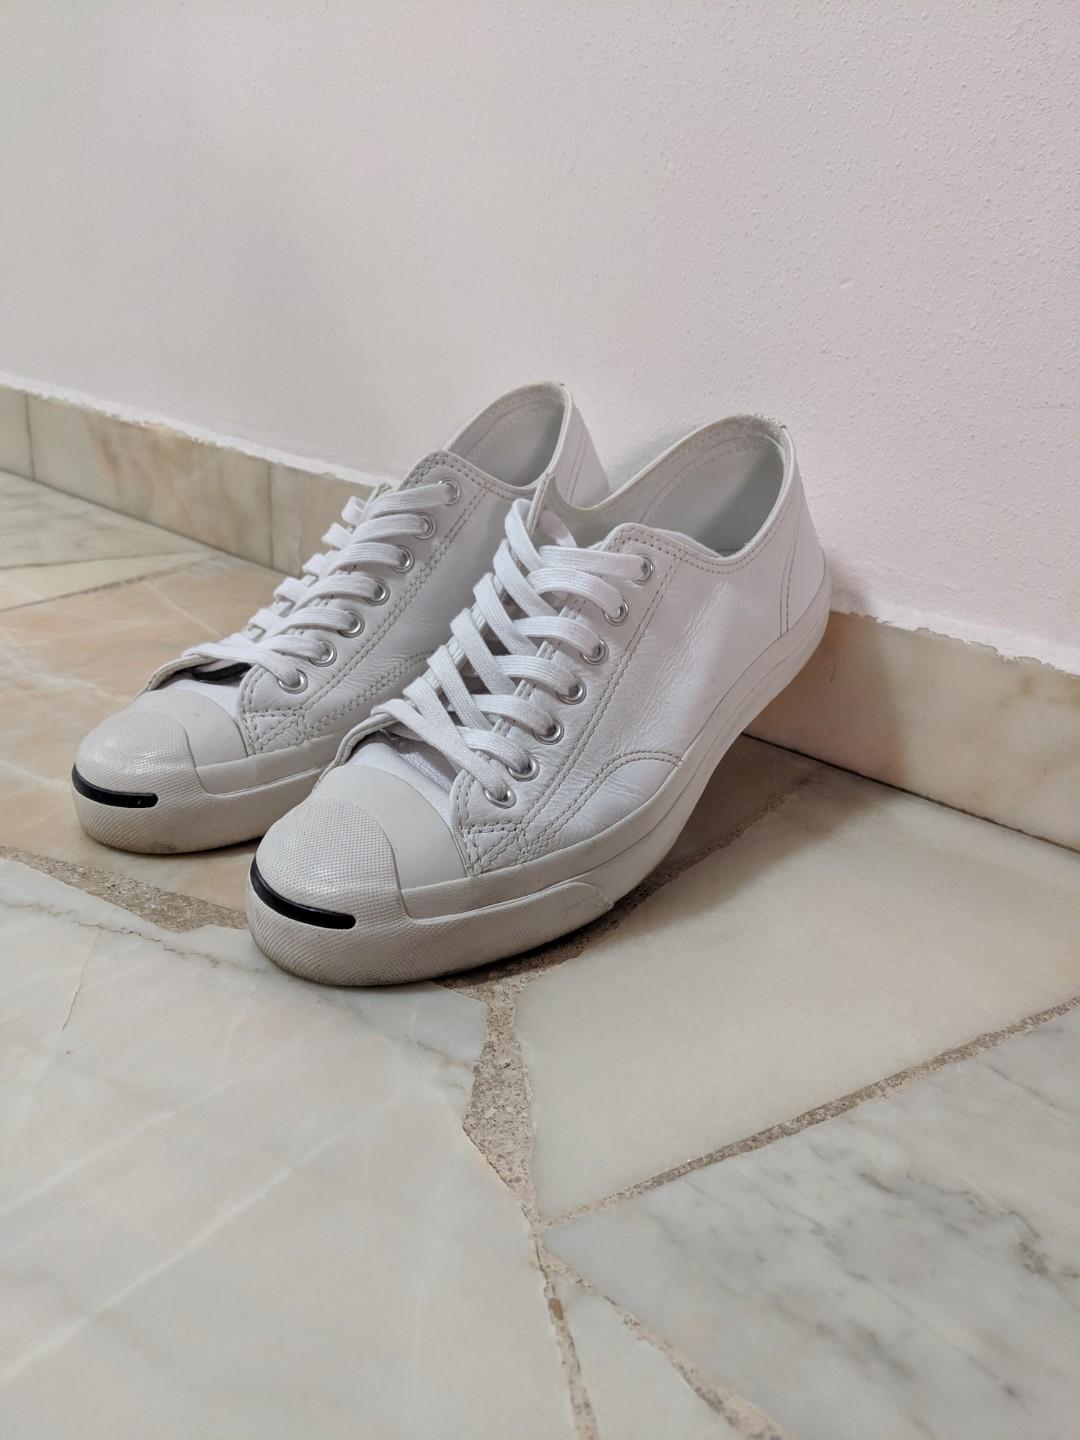 converse jack purcell white